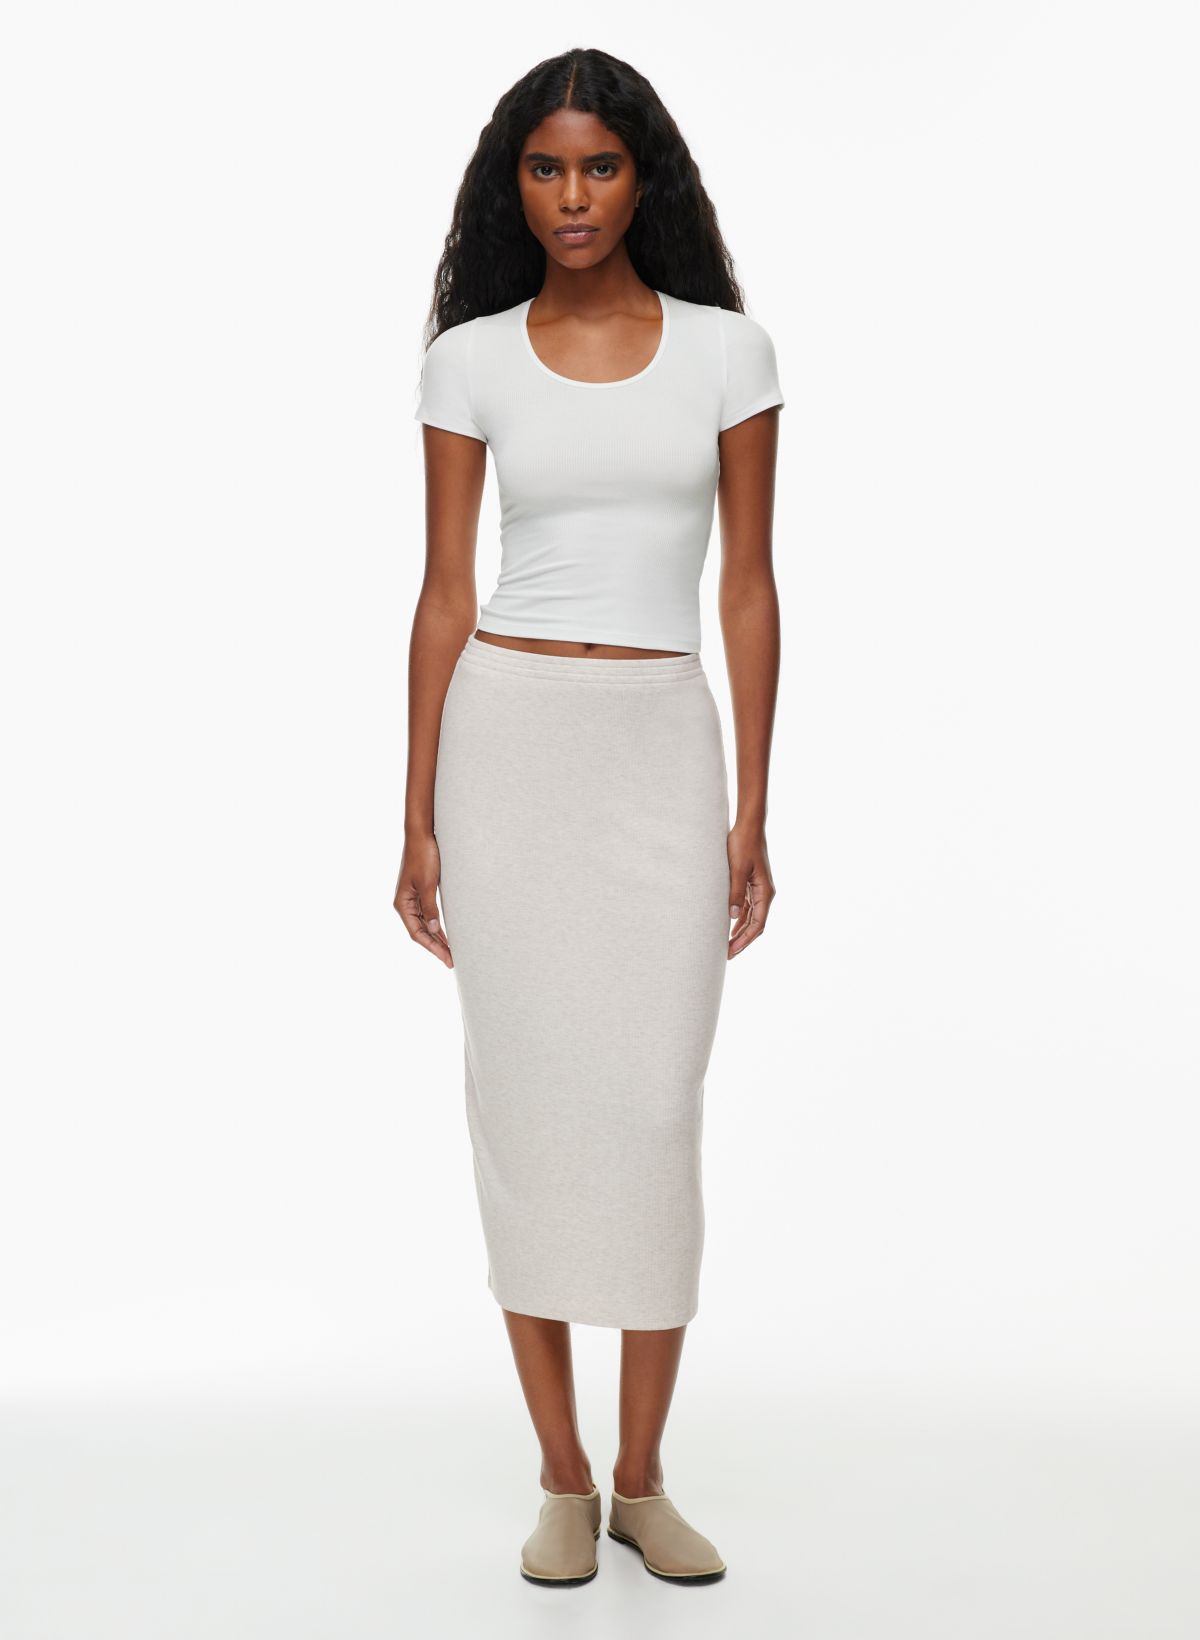 The Group by Babaton LUXE LOUNGE TOMORROW SKIRT